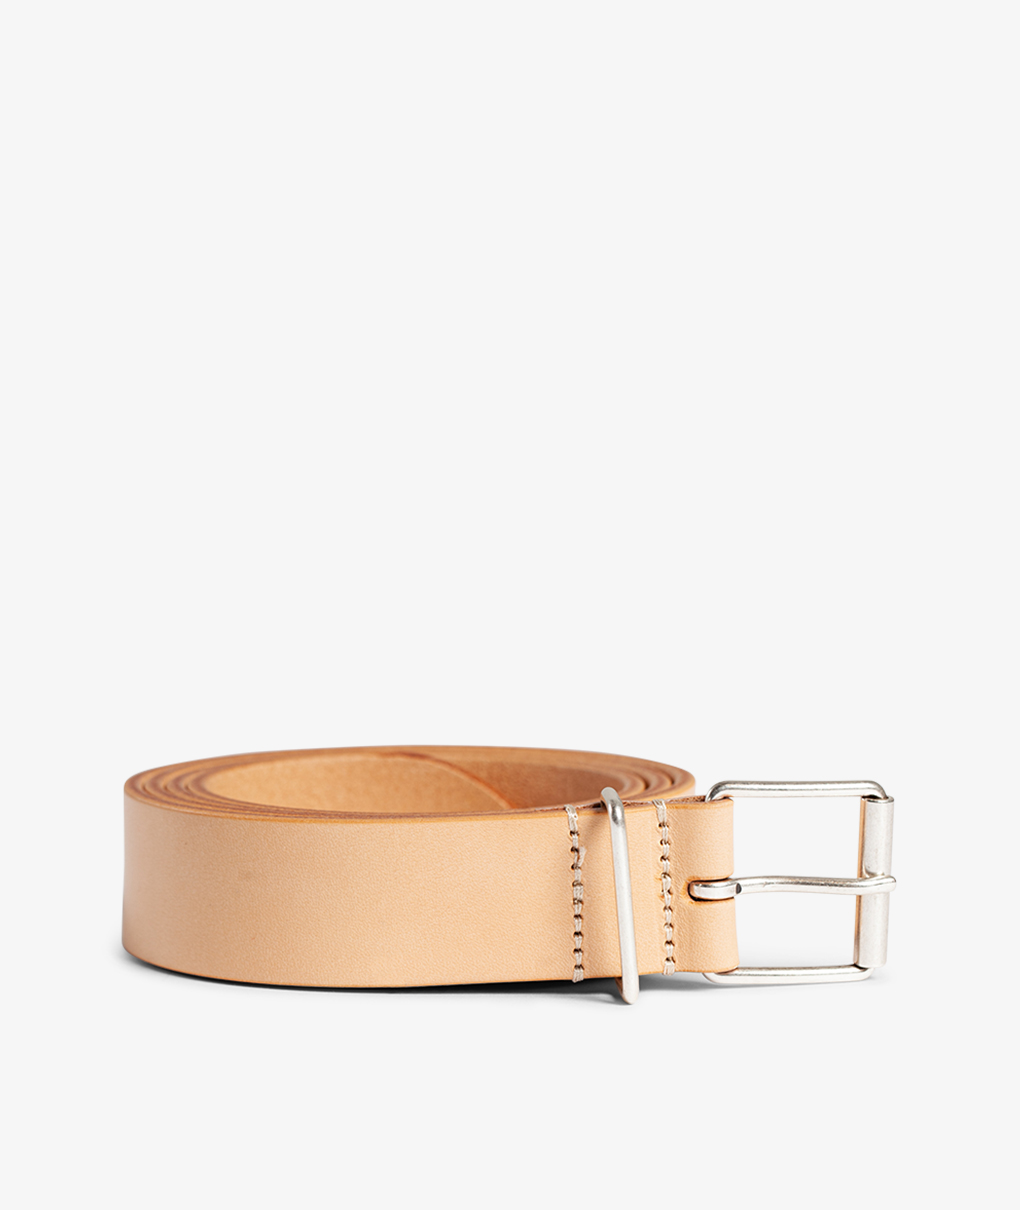 Norse Store | Shipping Worldwide - Anderson's Leather Belt - Natural